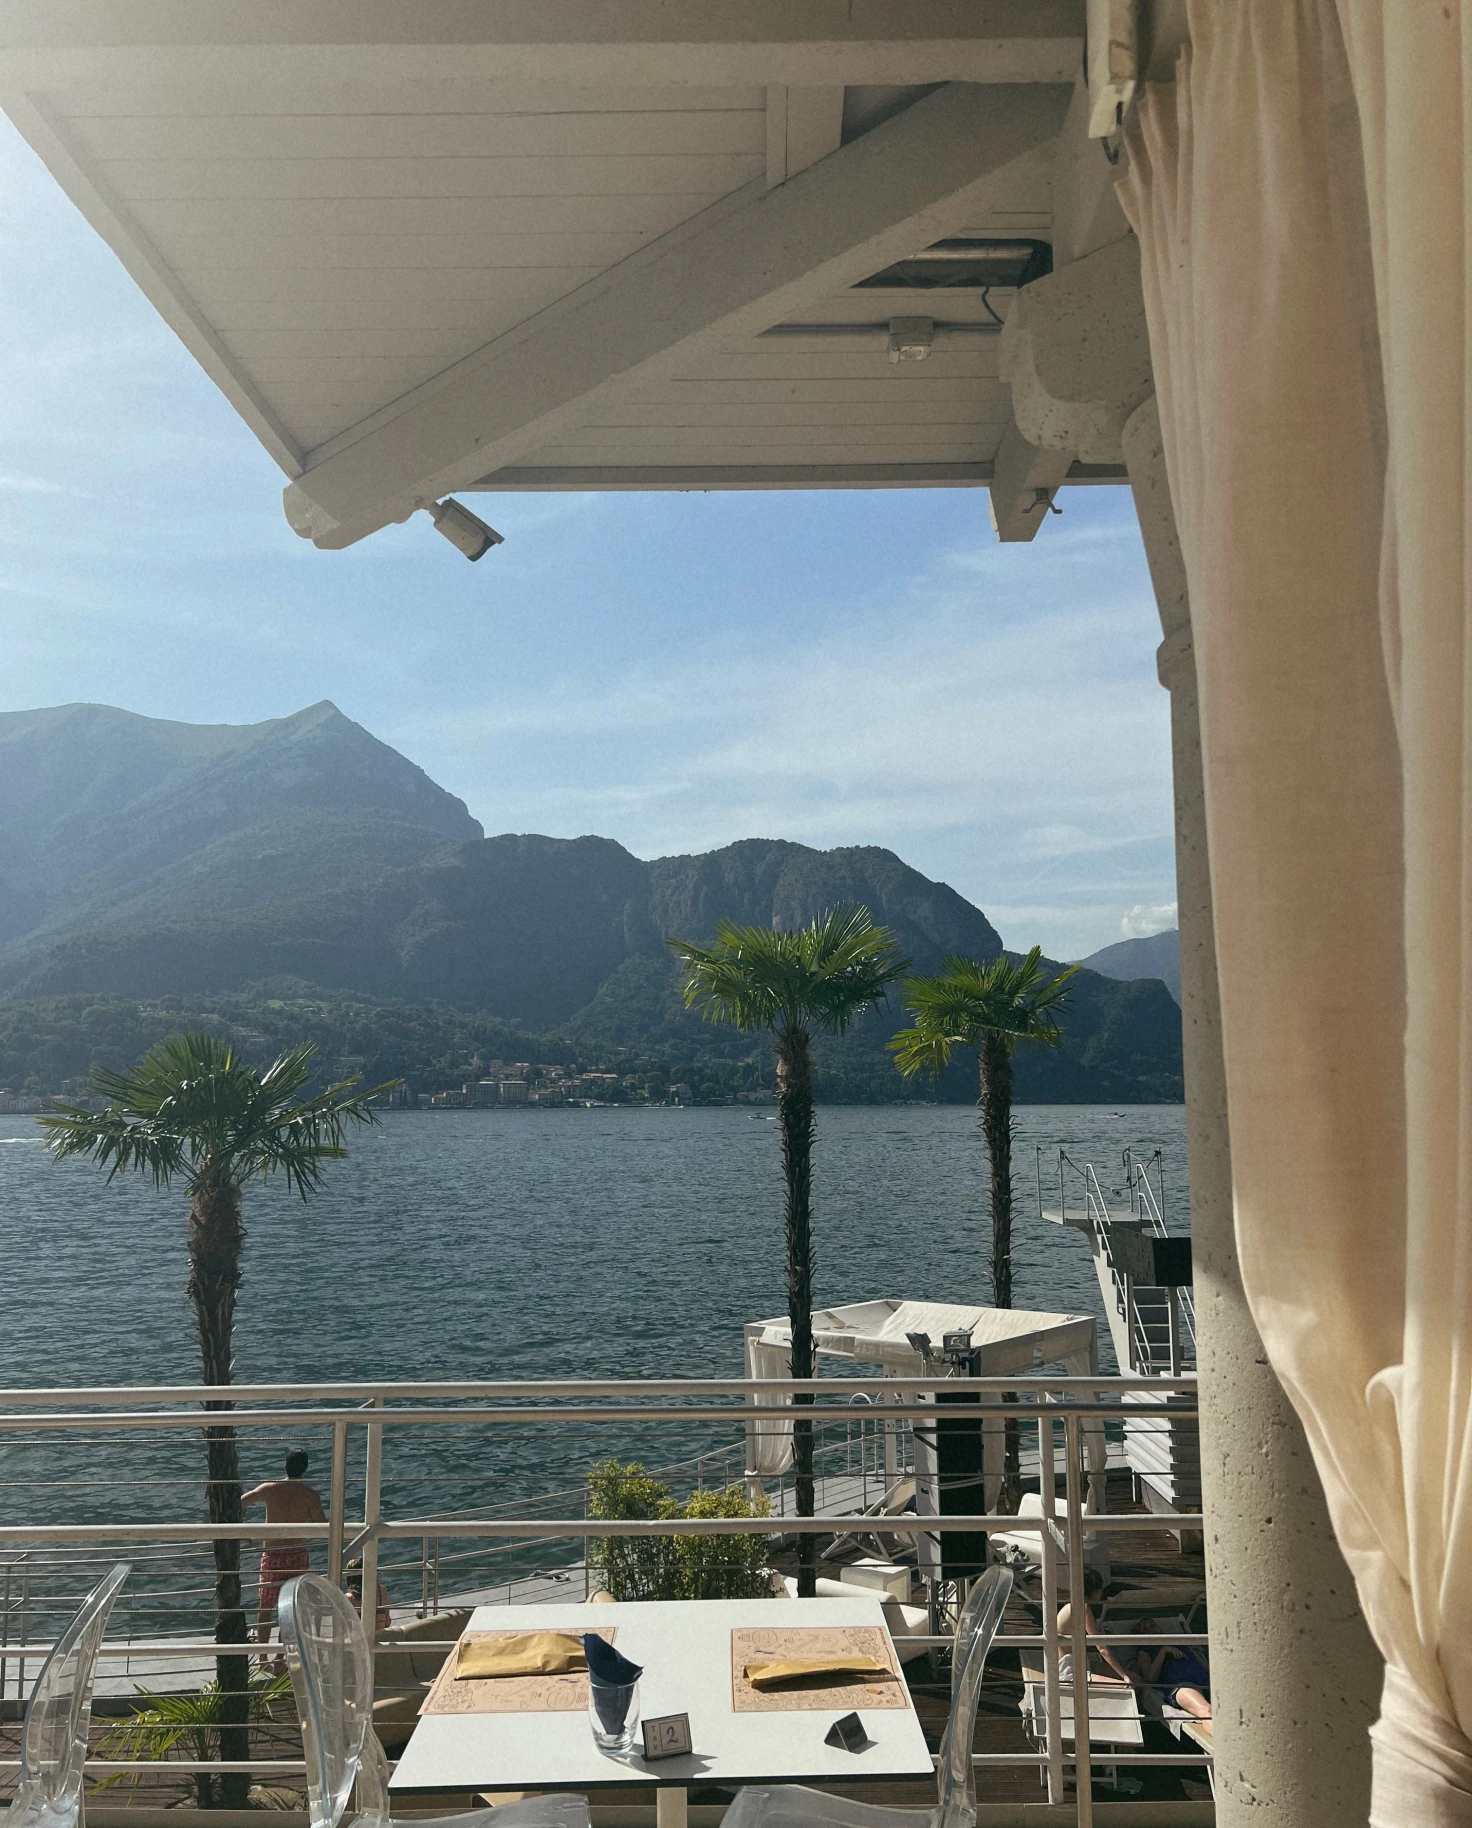 Seaside outdoor patio of Lido restaurant in Lake Como, Italy on a sunny day.